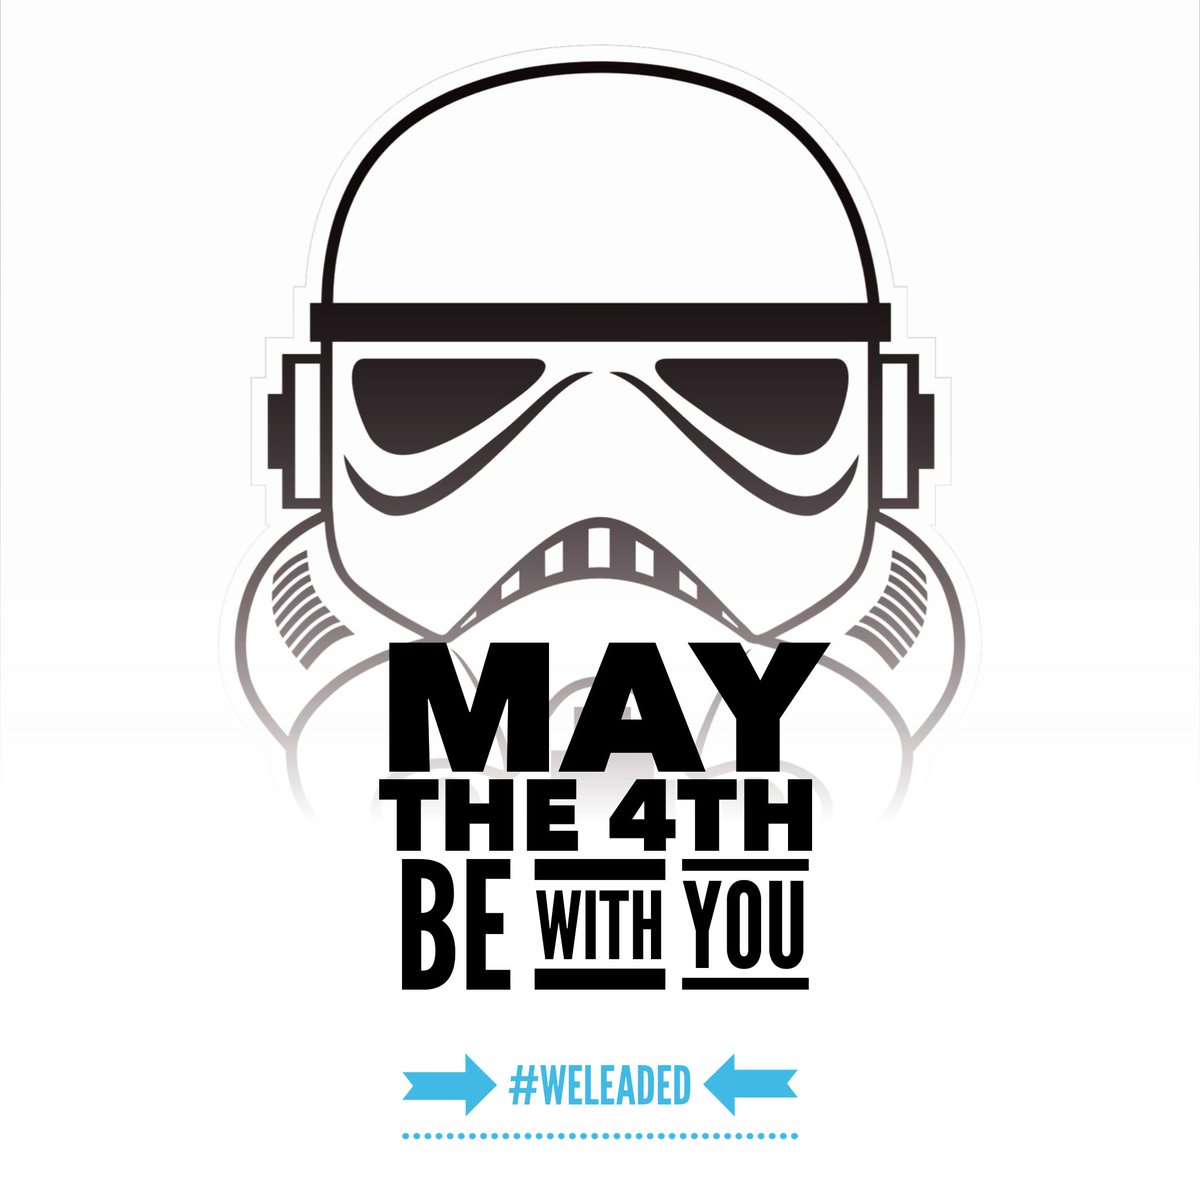 May the 4th be with you! 

#WeLeadEd #Edleadership #k12 #Leadership #Womened #BWEL #satchat #edchat #leadlap